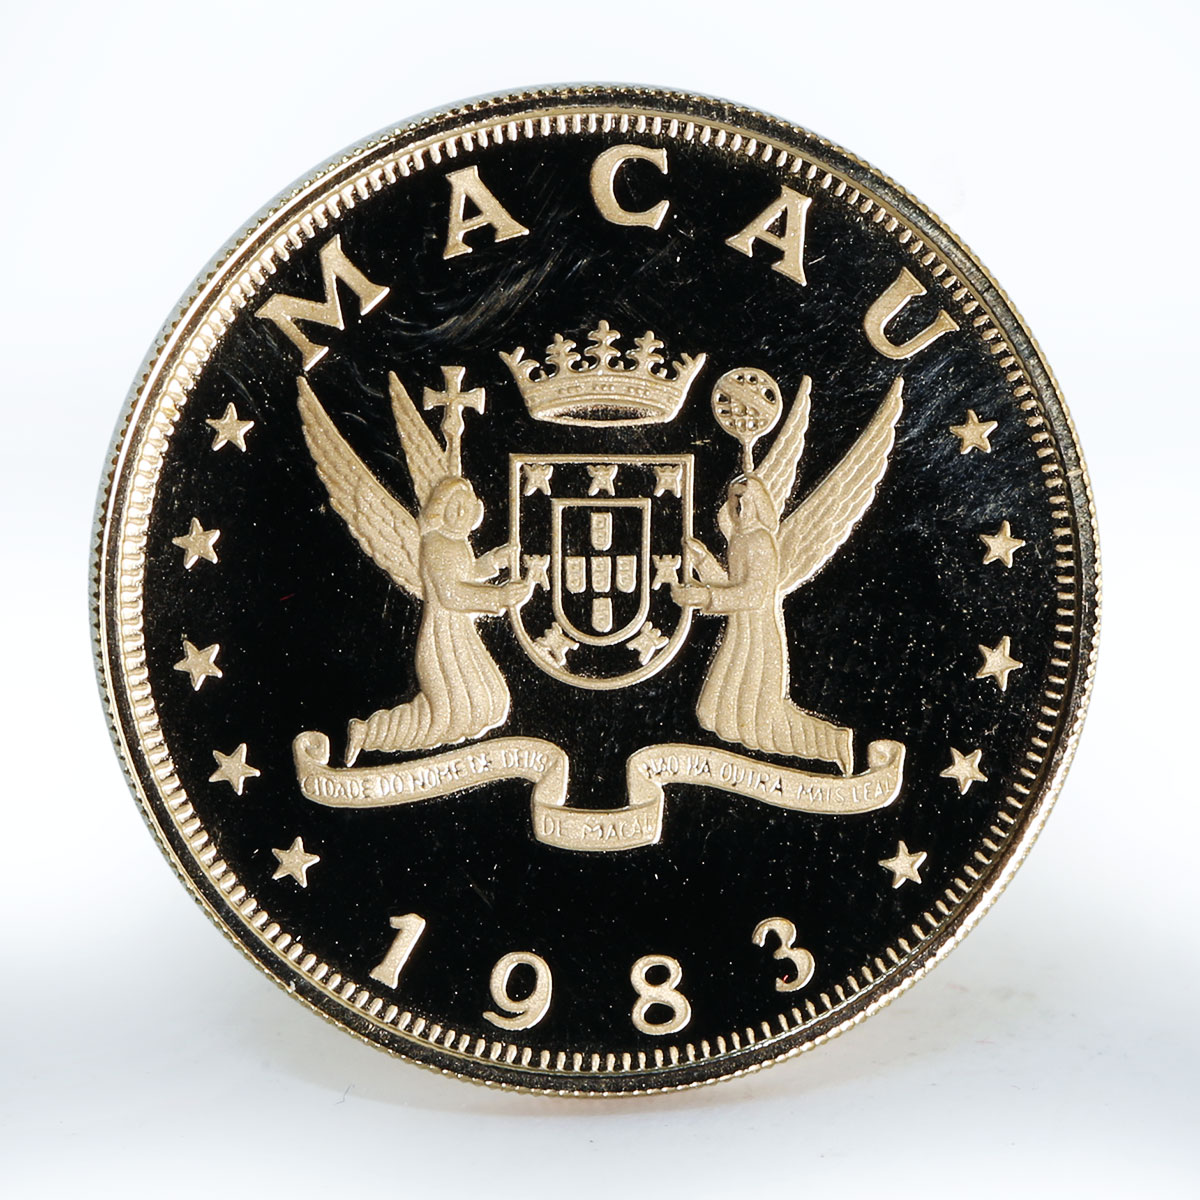 Macau 1000 patacas Year of the Pig proof gold coin 1983